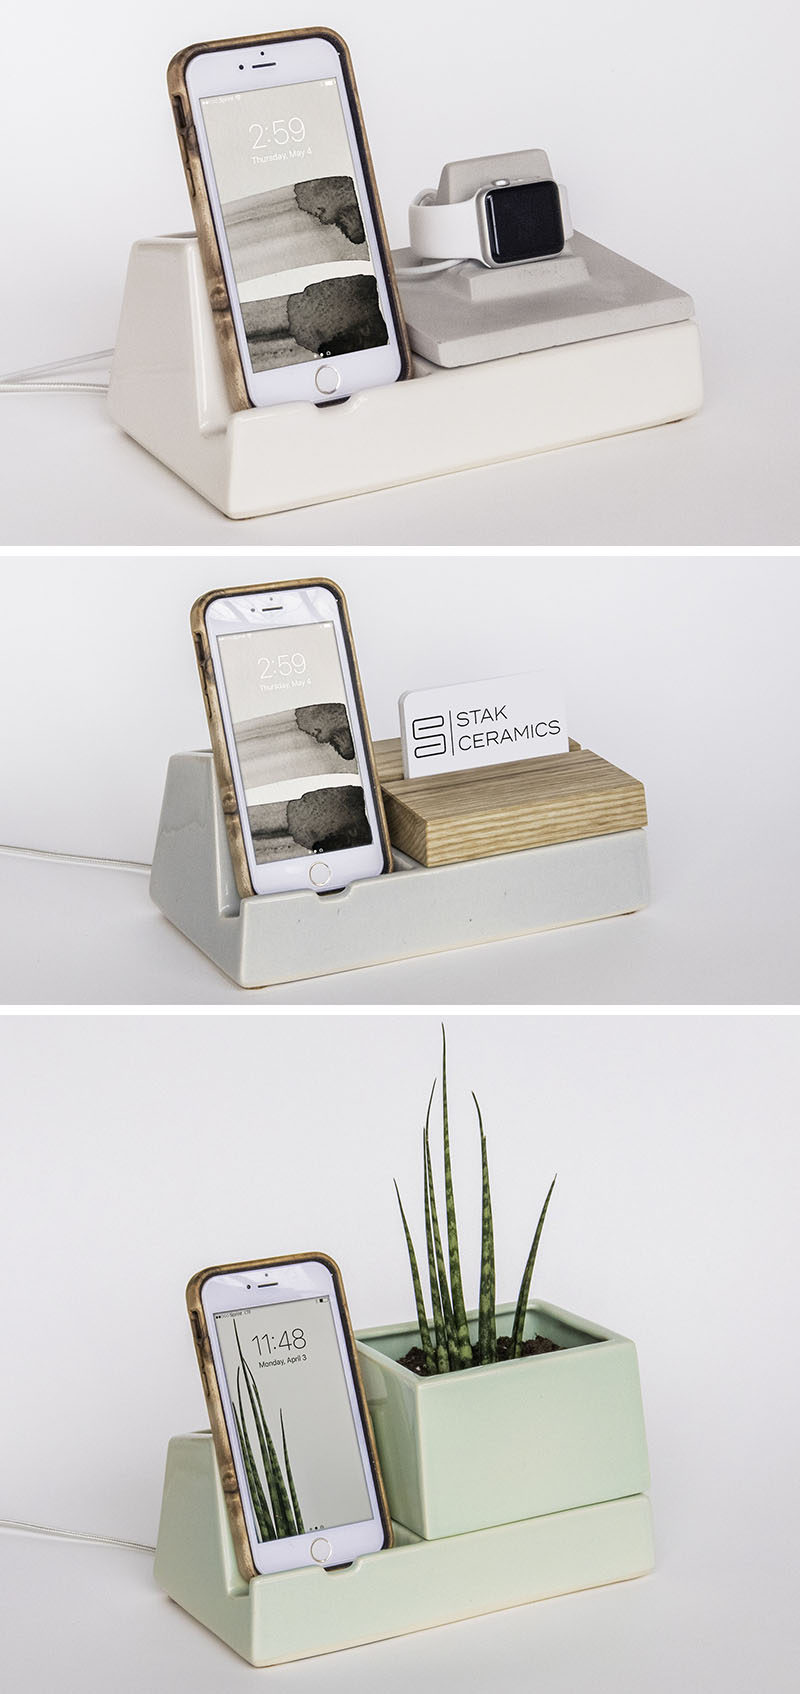 STAK Ceramics have designed a collection of multi-purpose phone and tablet holders that have containers, planters or vases as part of their design. #PhoneHolder #TabletHolder #HomeDecor #Design